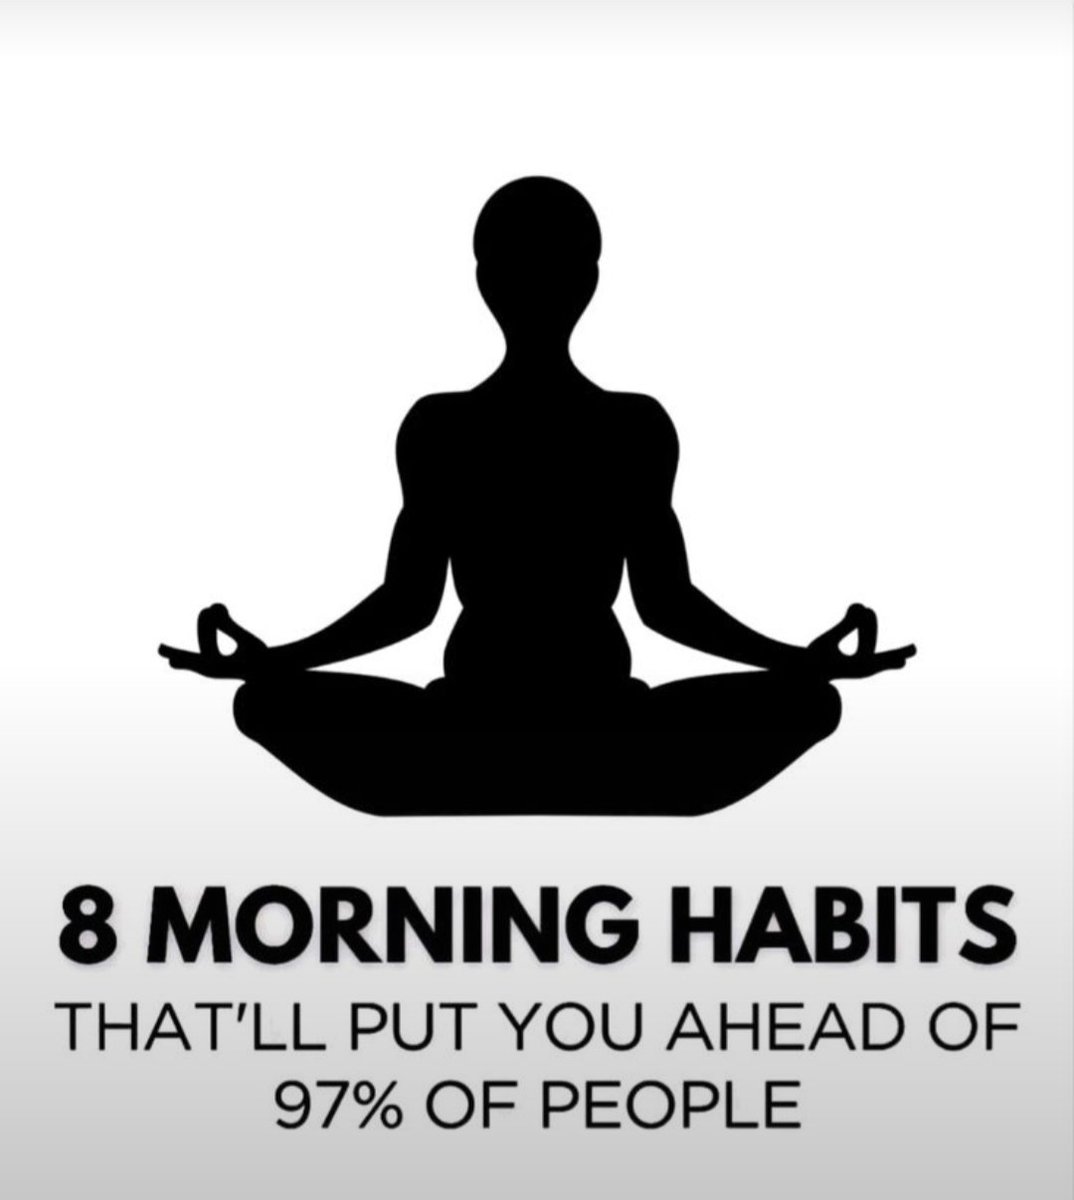 8 Morning Habits That'll Put You Ahead Of 97% Of People...